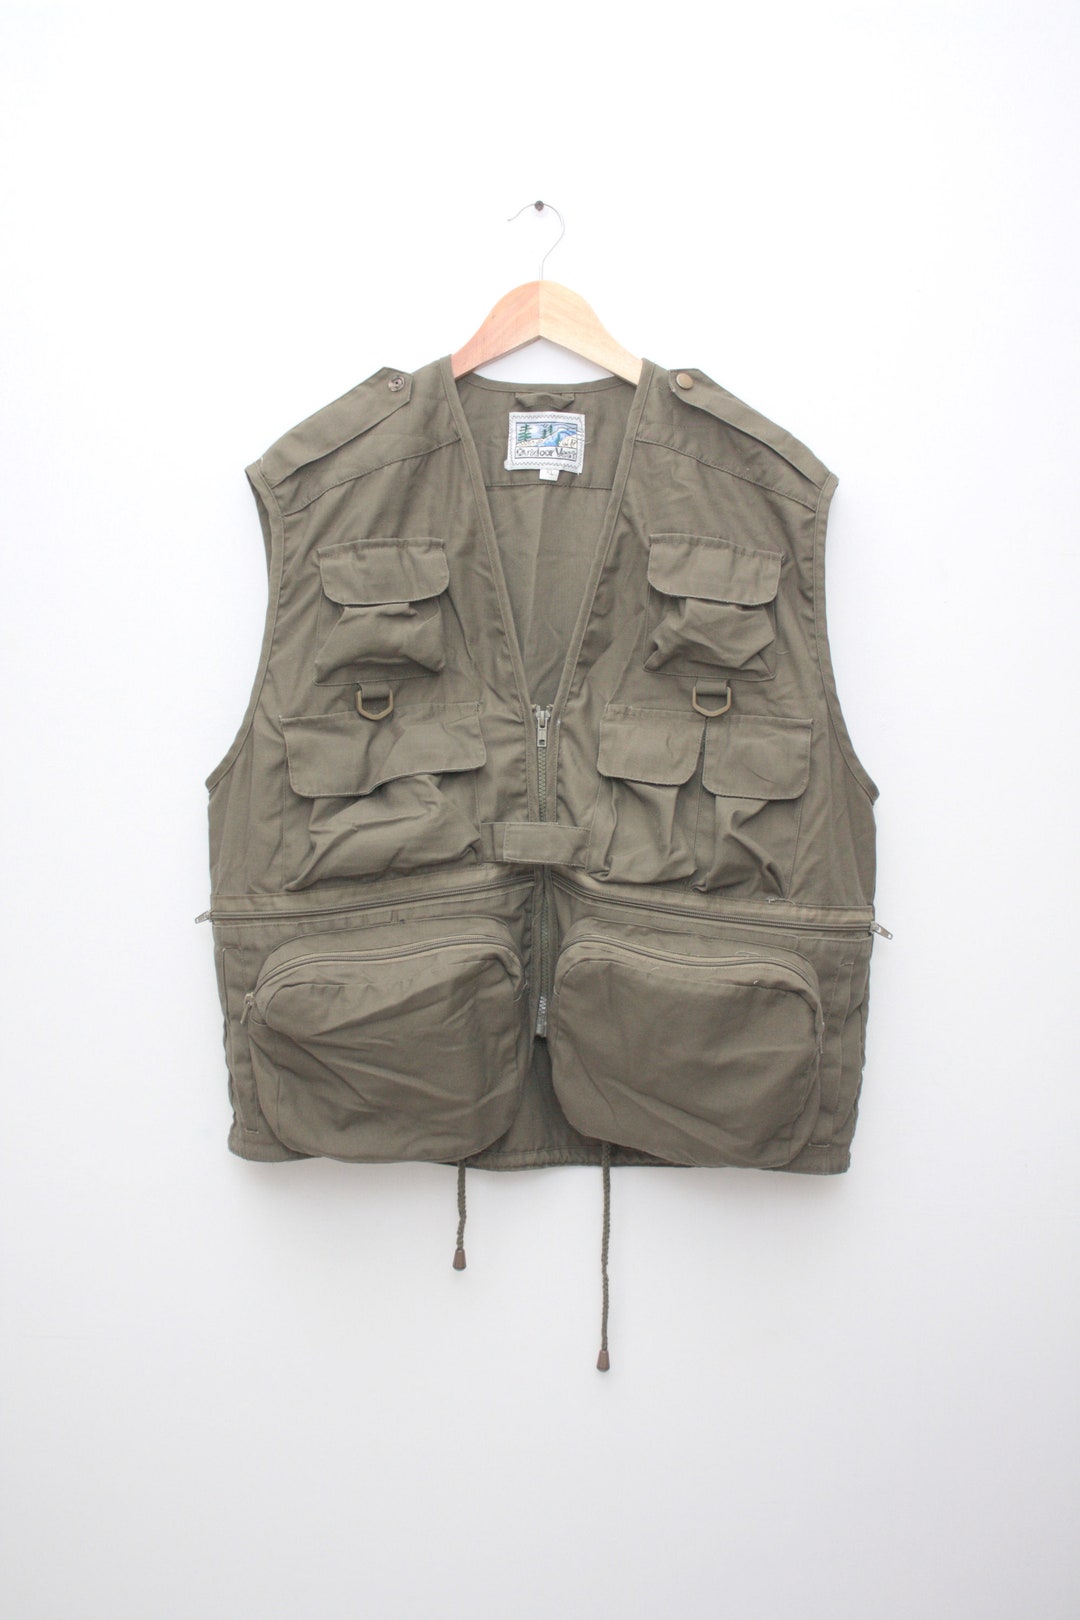 Outdoor Vest Multipocket Army Green Vintage Japanese Style - Etsy